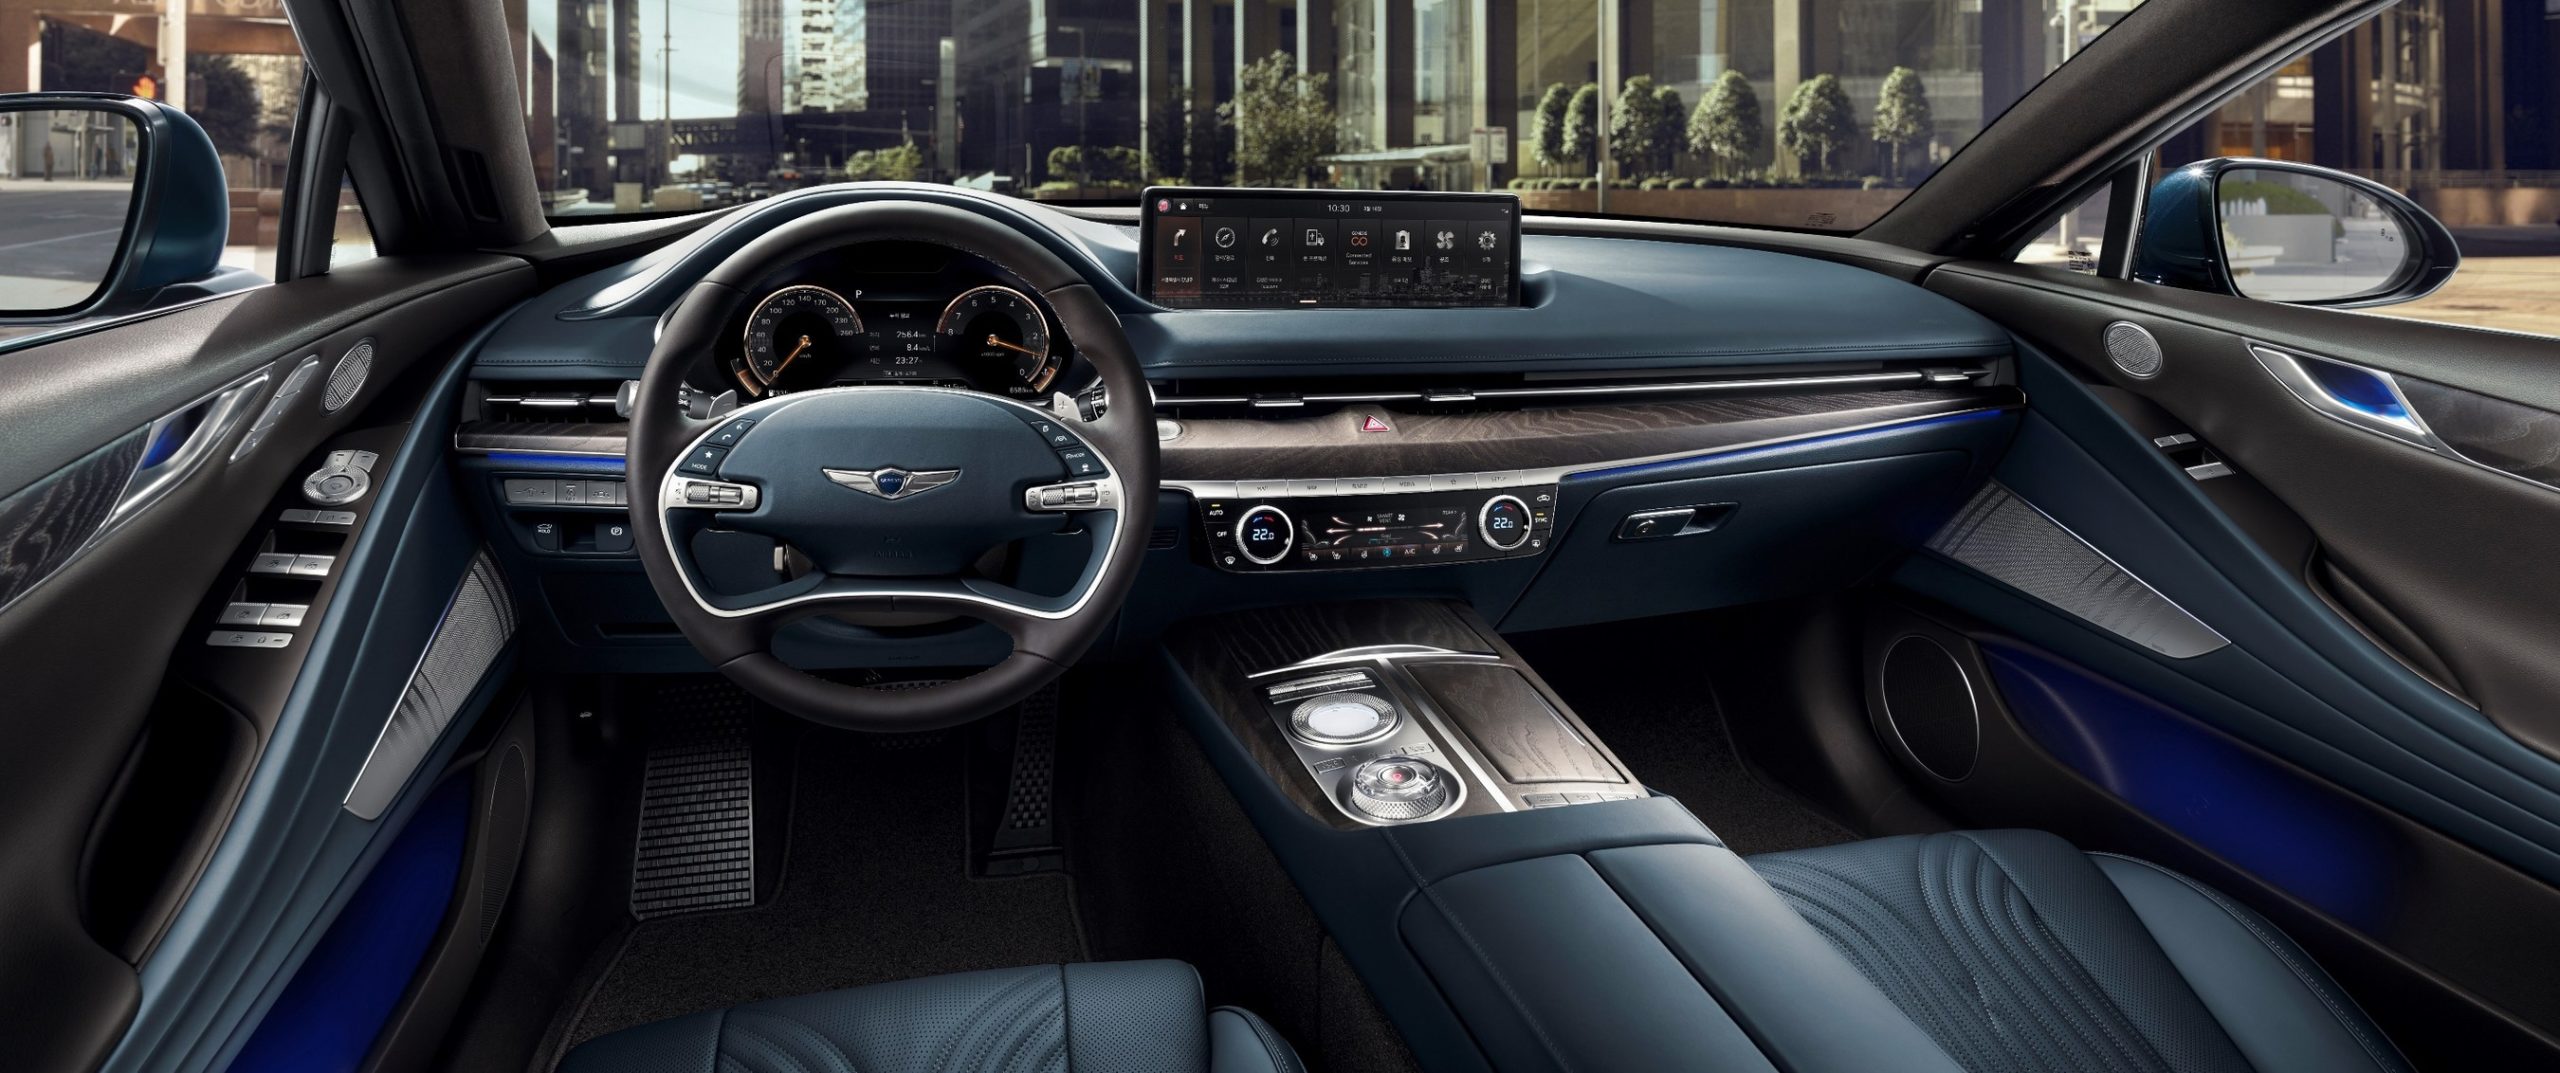 Genesis Rolls Out Third-Generation G80 | THE SHOP